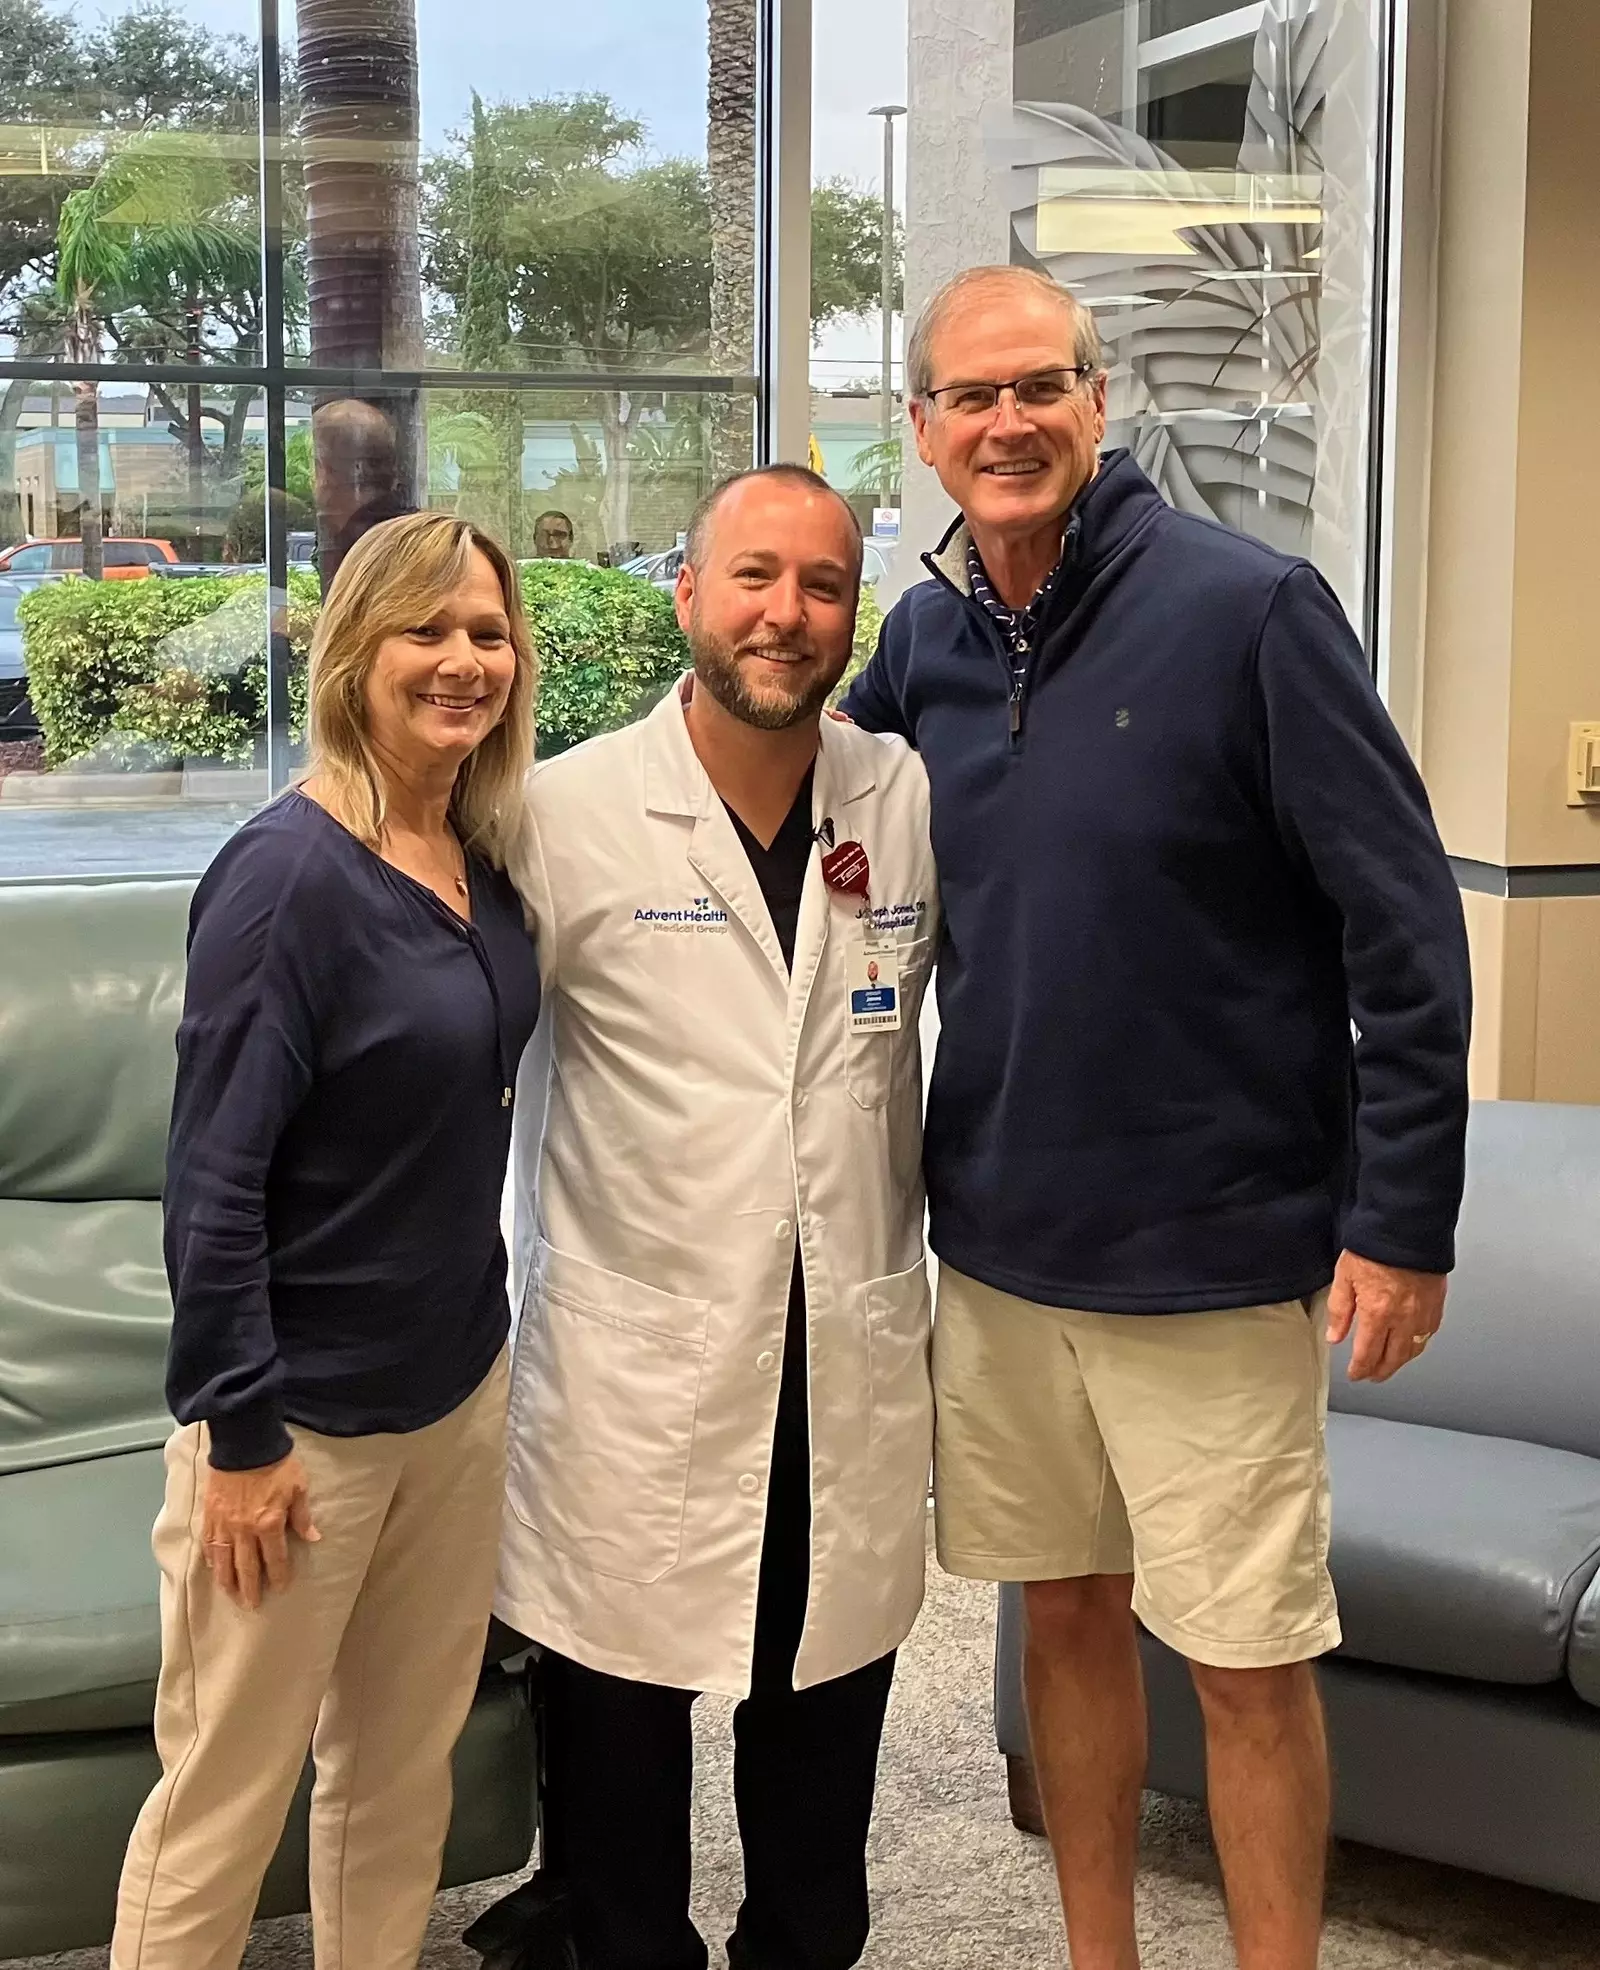 After his recovery from a heart attack, Kevin Keyes and his wife Lynn return to AdventHealth New Smyrna Beach to thank Dr. Joe Jones.